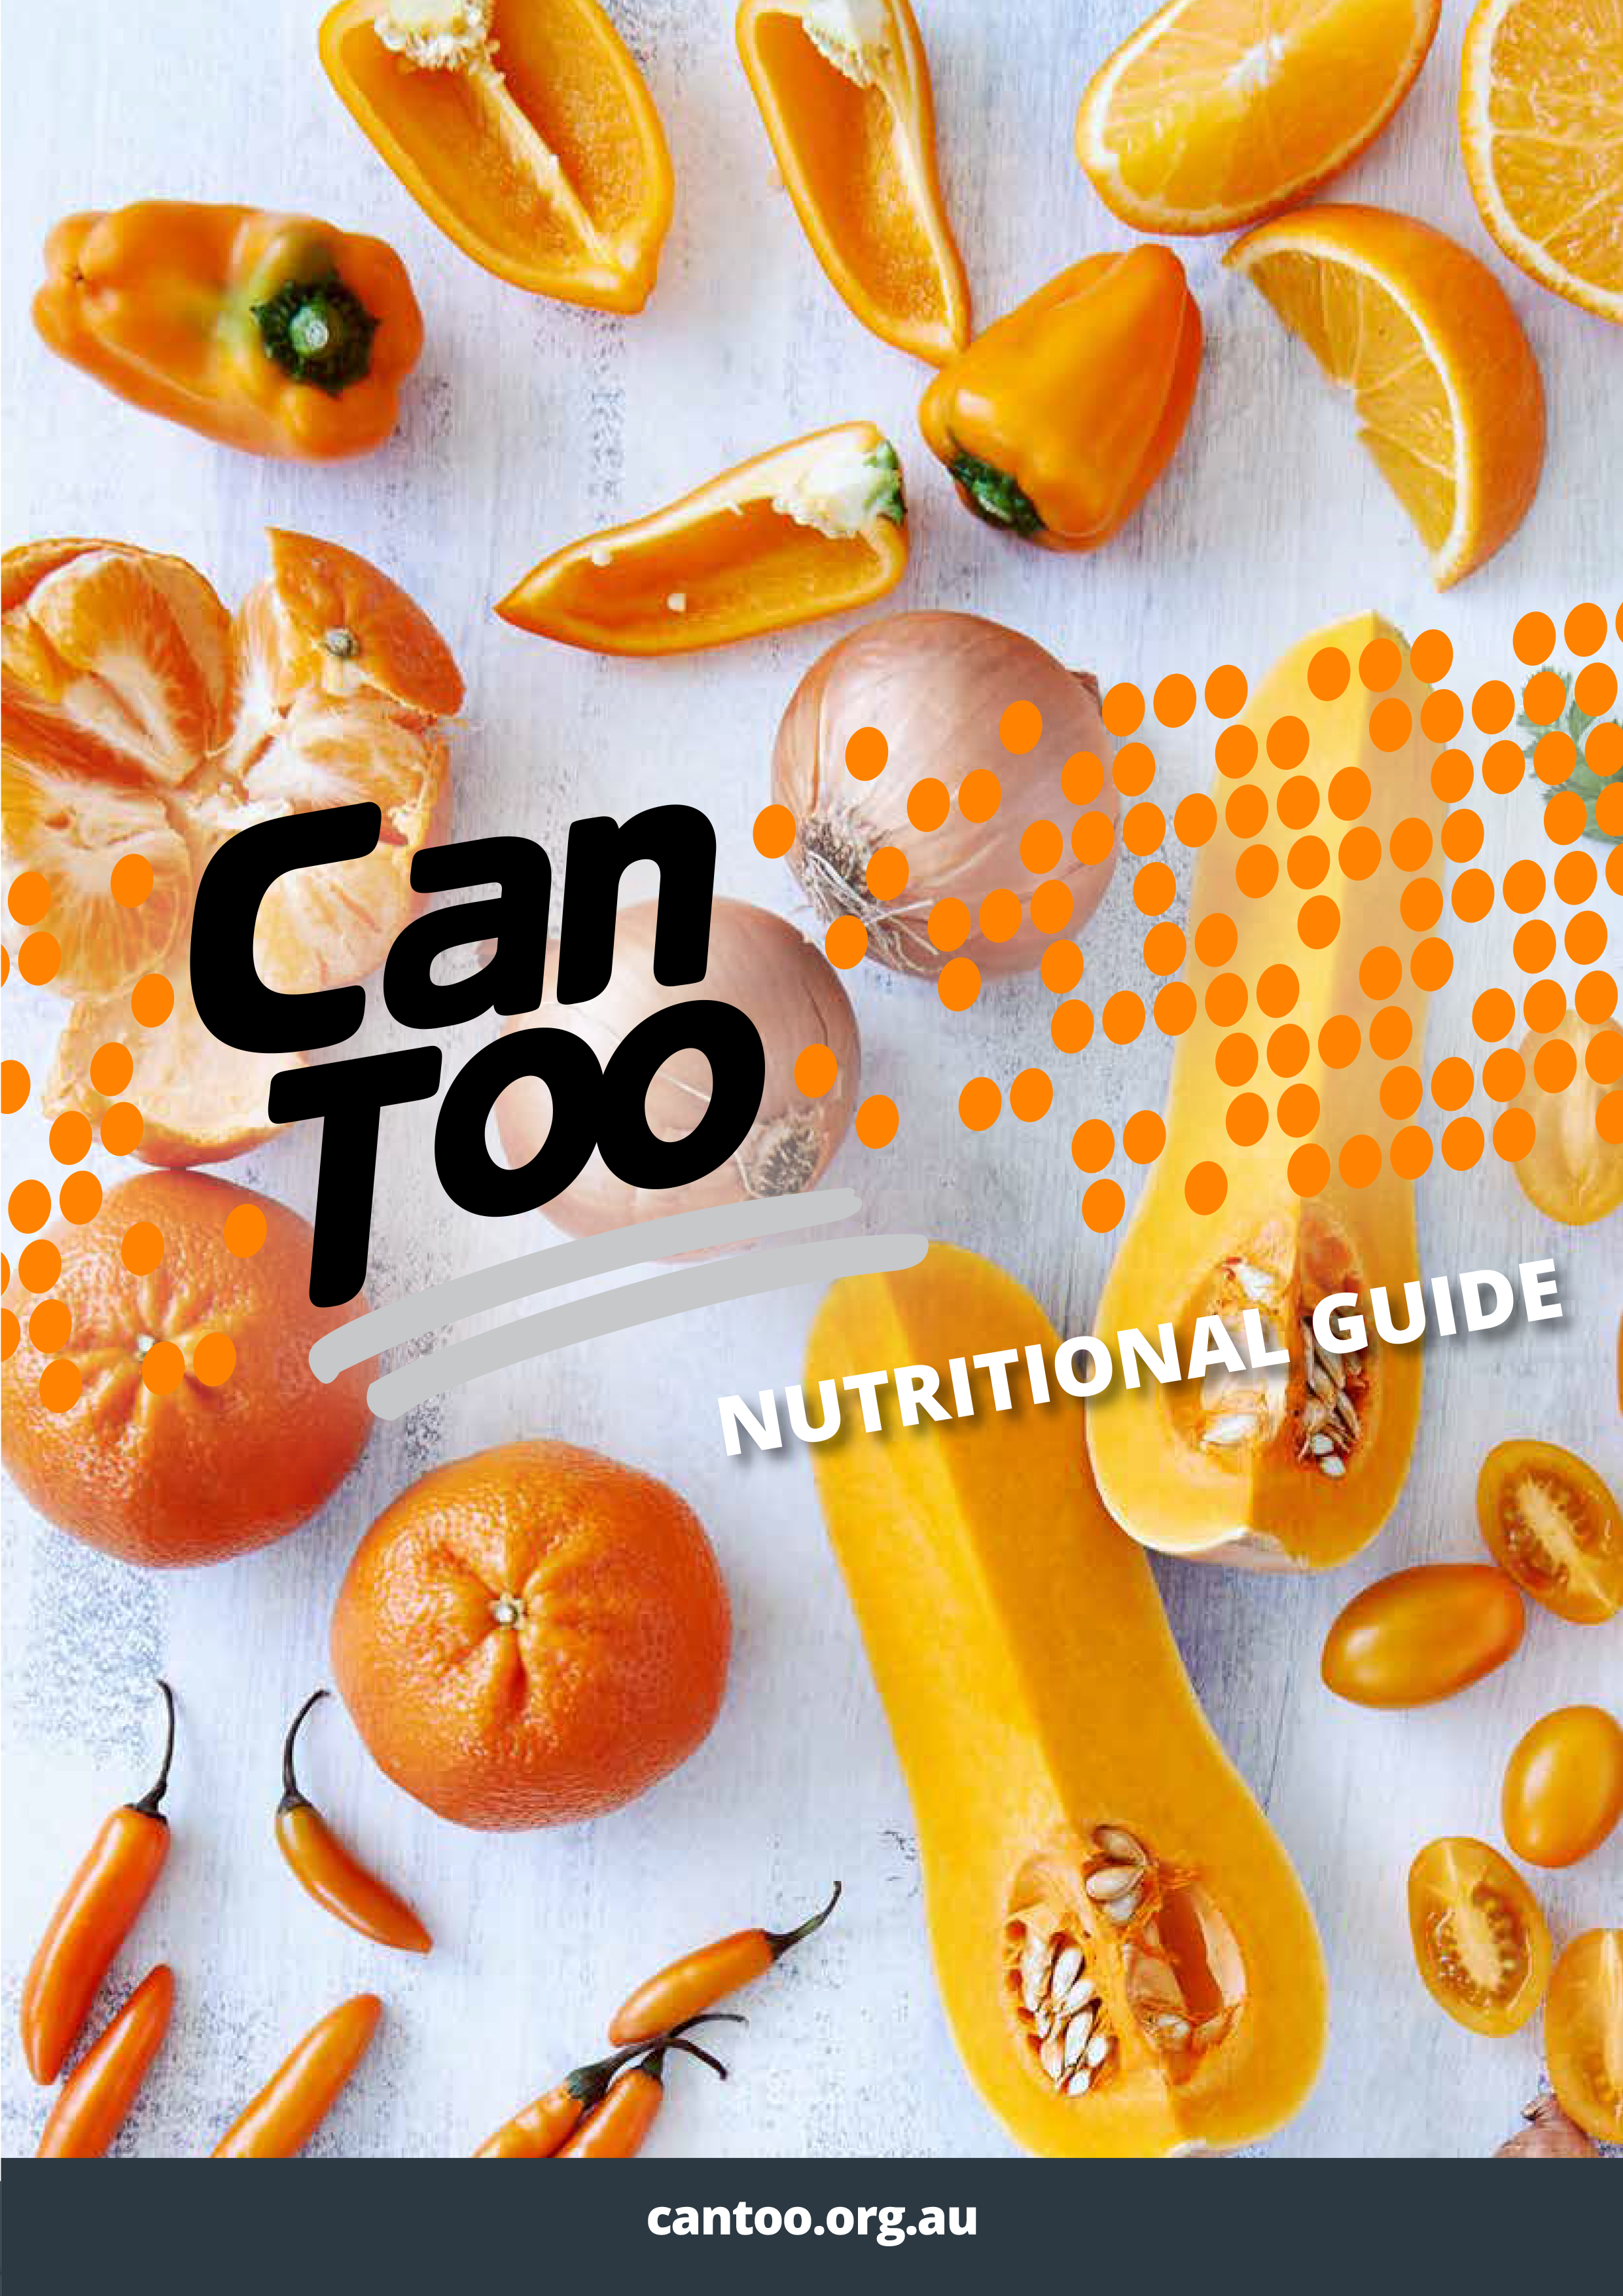 Can Too Foundation Nutritional Guide